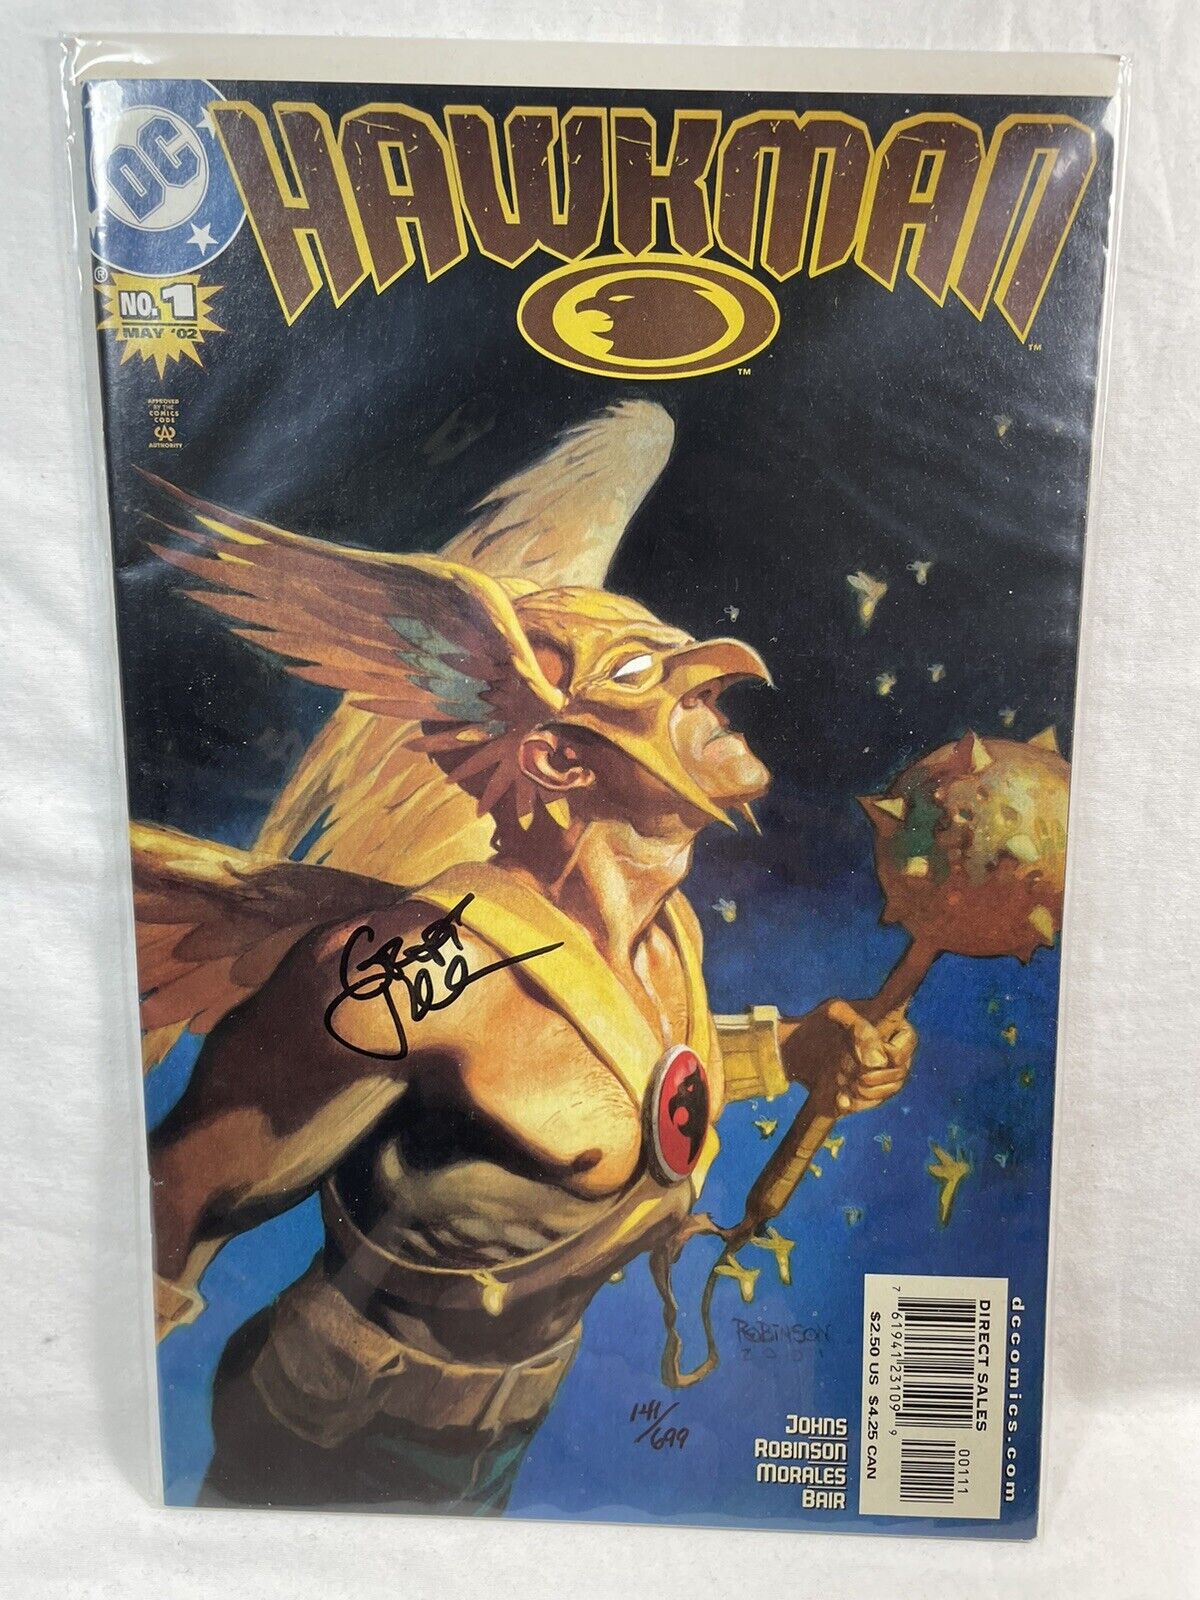 DC Comics HAWKMAN #1 2002 Dynamic Forces #141 of 699 Signed by GEOFF JOHNS